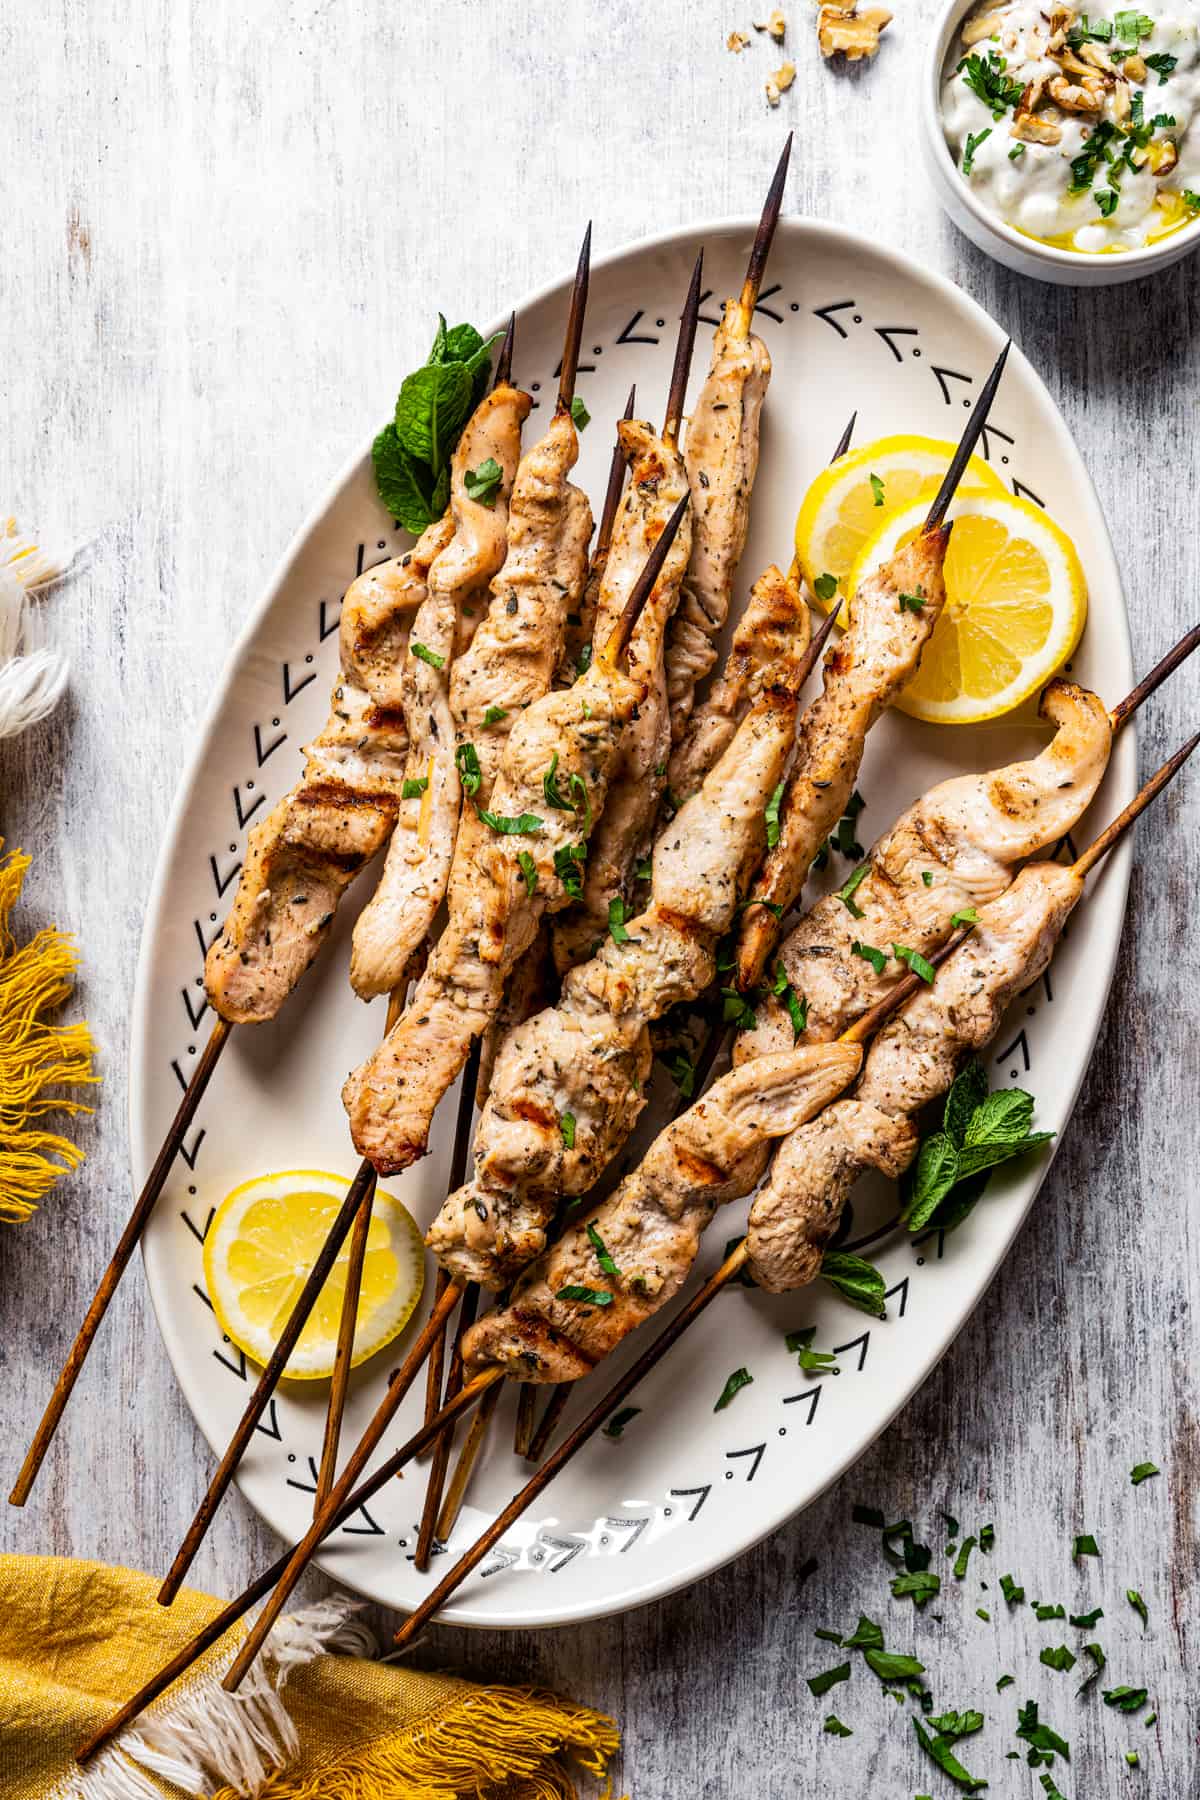 A serving plate with cooked chicken skewers and lemon wedges.